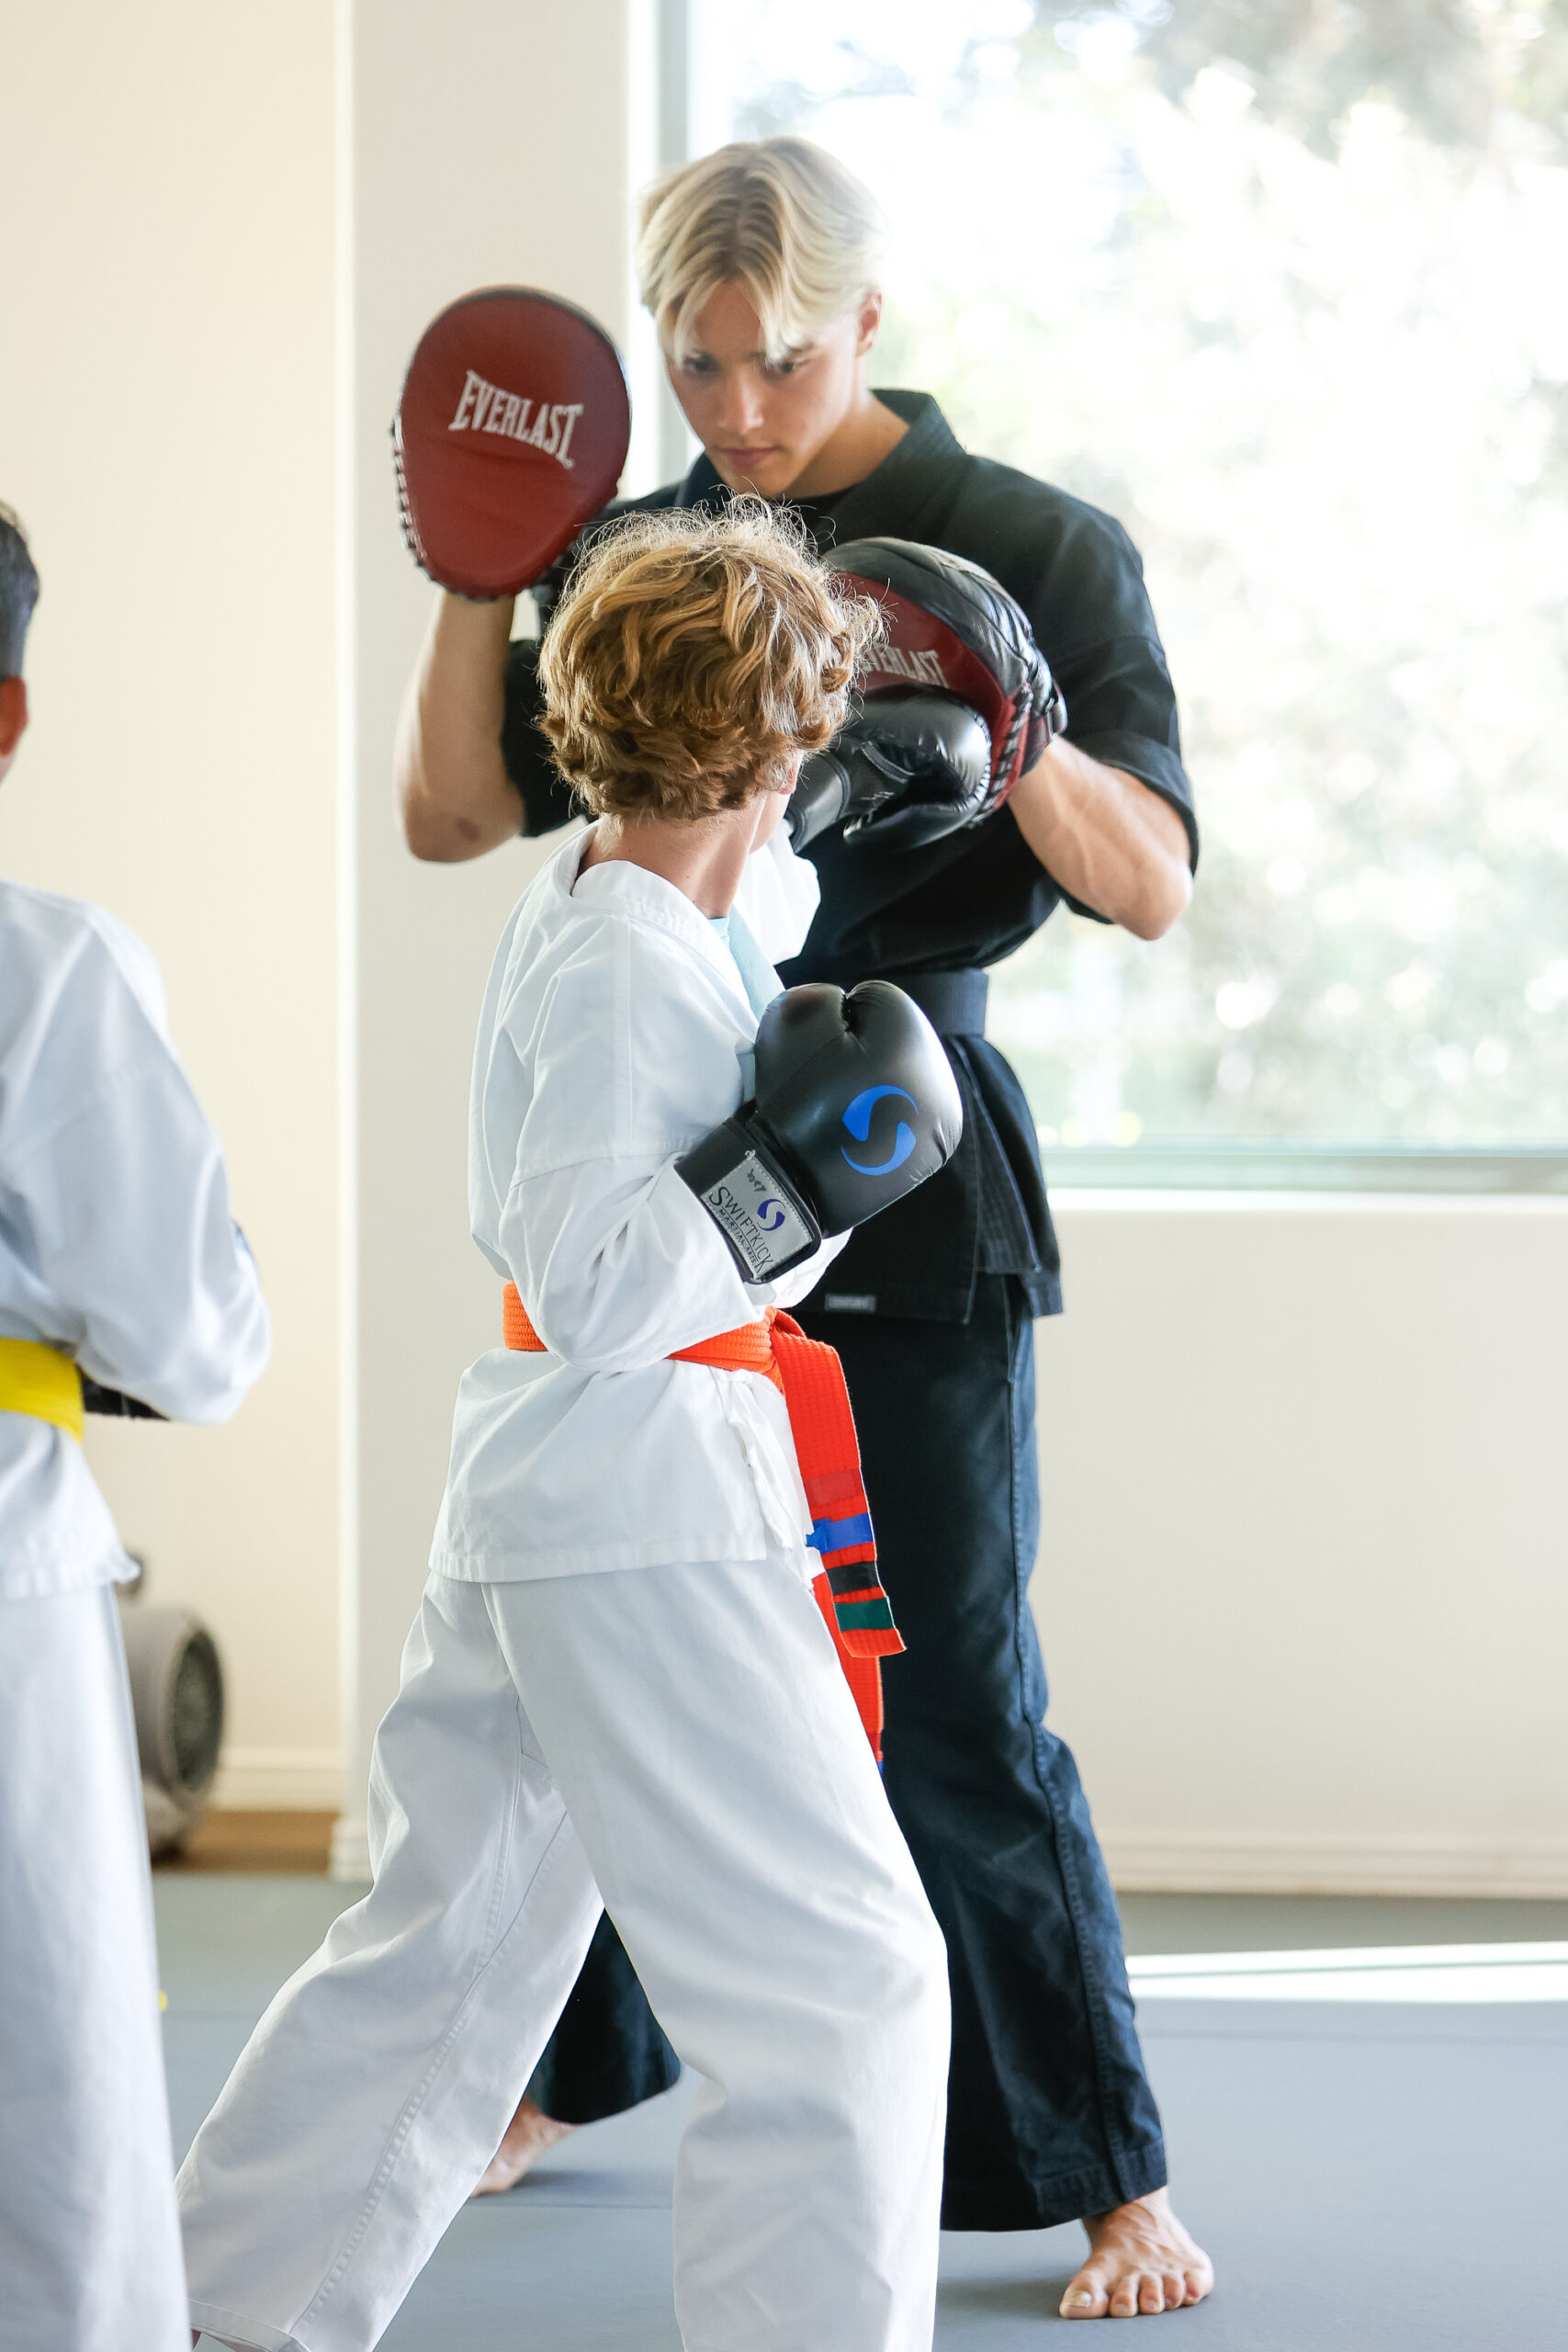 Boy punching pads with martial arts instructor.